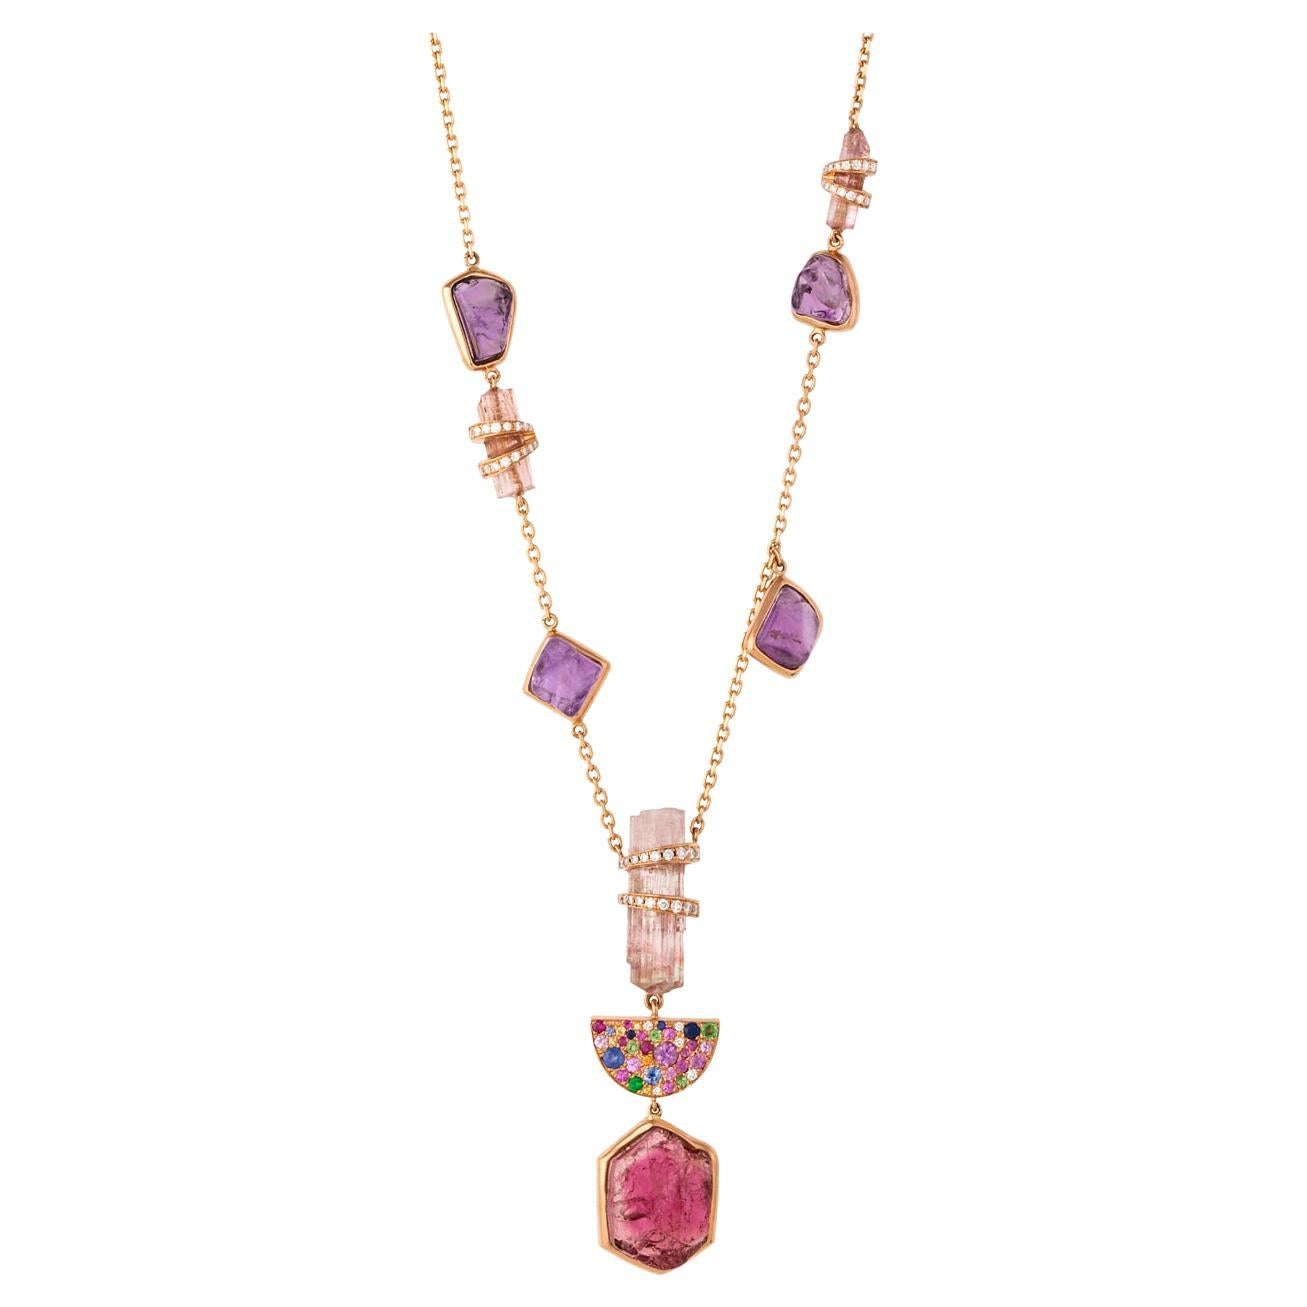 18k Rose Gold Necklace with Tourmaline, Amethysts, Sapphires and Diamonds